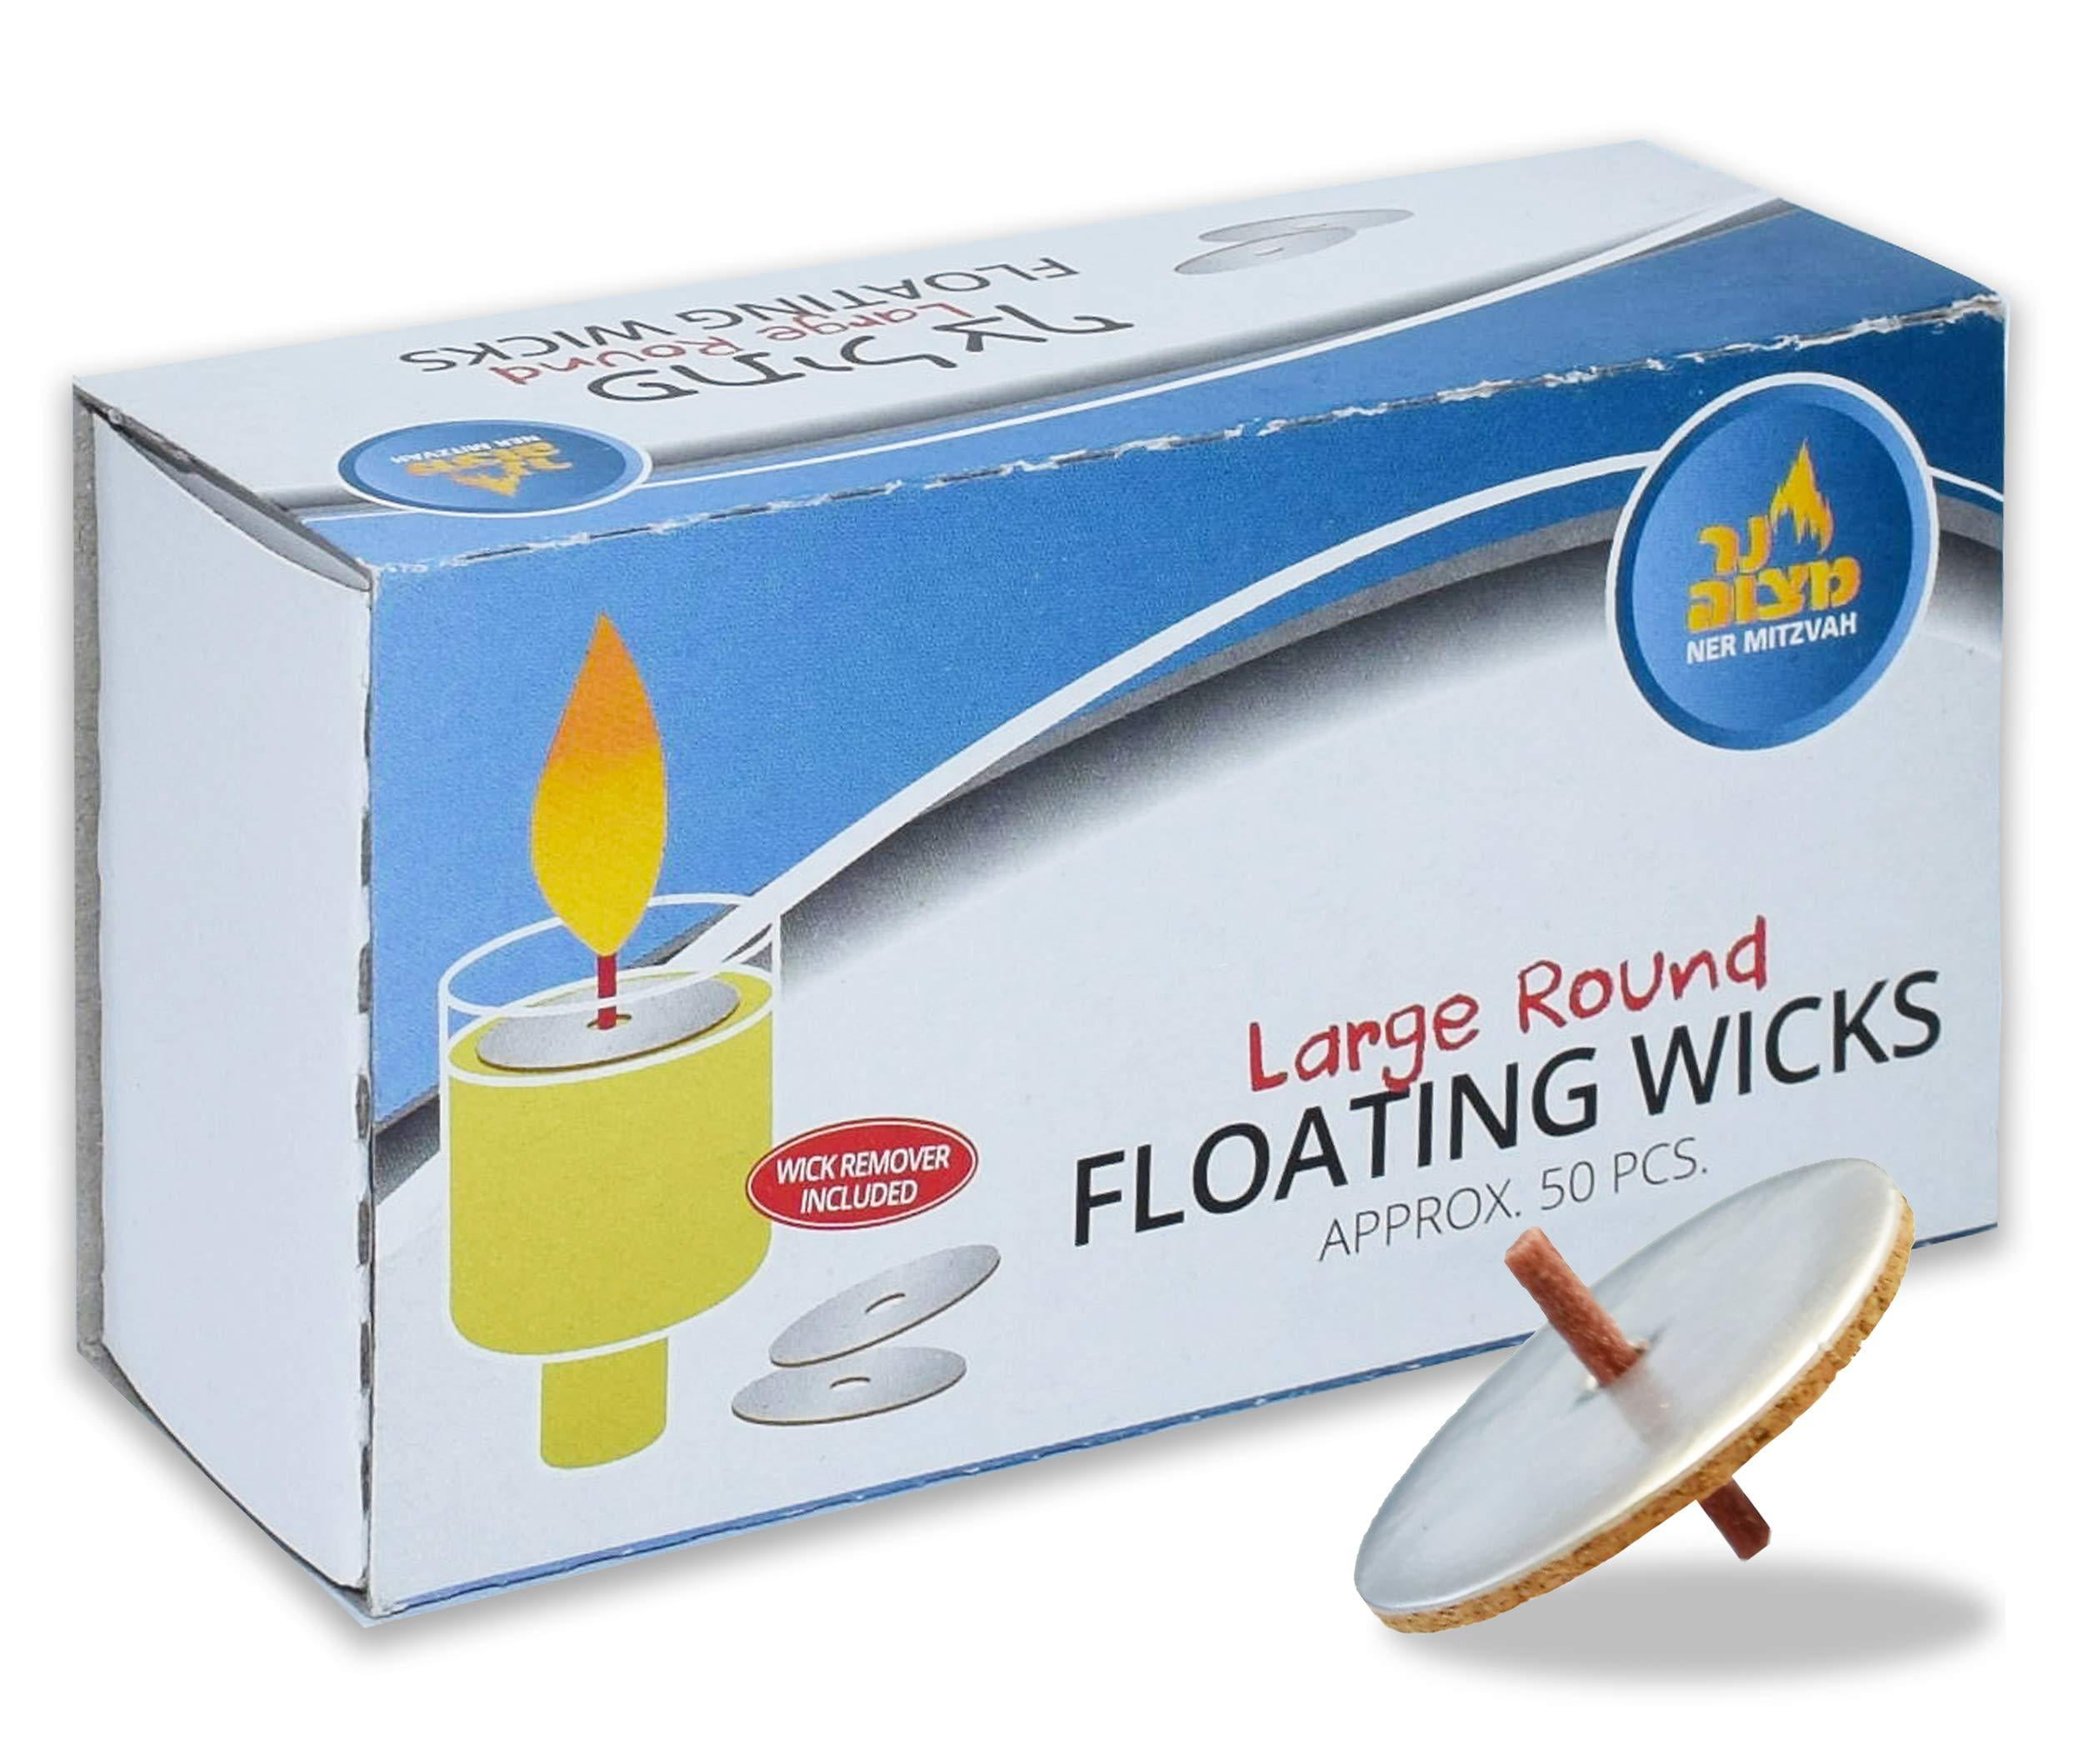 Round Floating Wicks 100 Count (Approx.), Large Cotton Wicks and Cork Disc  Holders for Oil Cups - Bonus Wick Removal Tweezers - Walmart.com